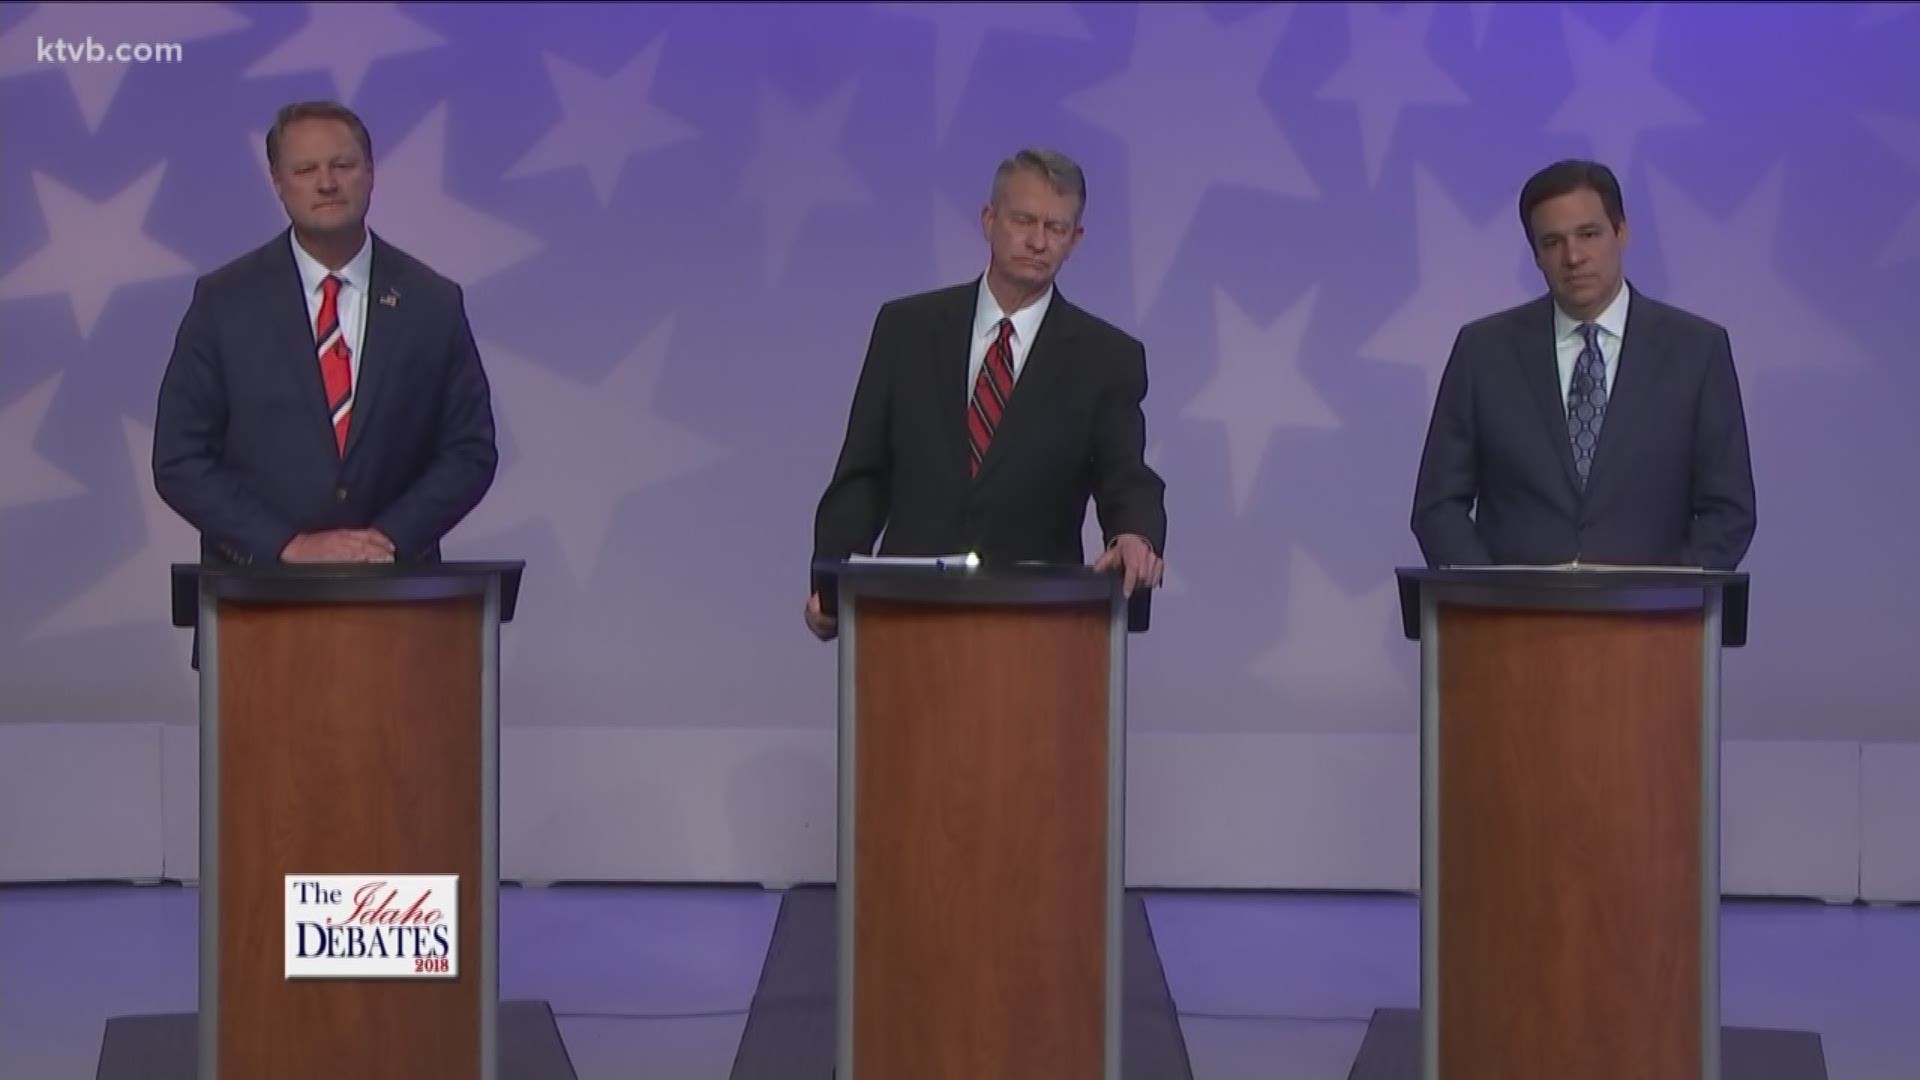 Dr. Tommy Ahlquist, Congressman Raul Labrador and Lt. Gov. Brad Little had the stage Monday night. Topics ranged from health care to gun laws to tax cuts. But it was the question about the attack ads that all three candidates have engaged in that drew the